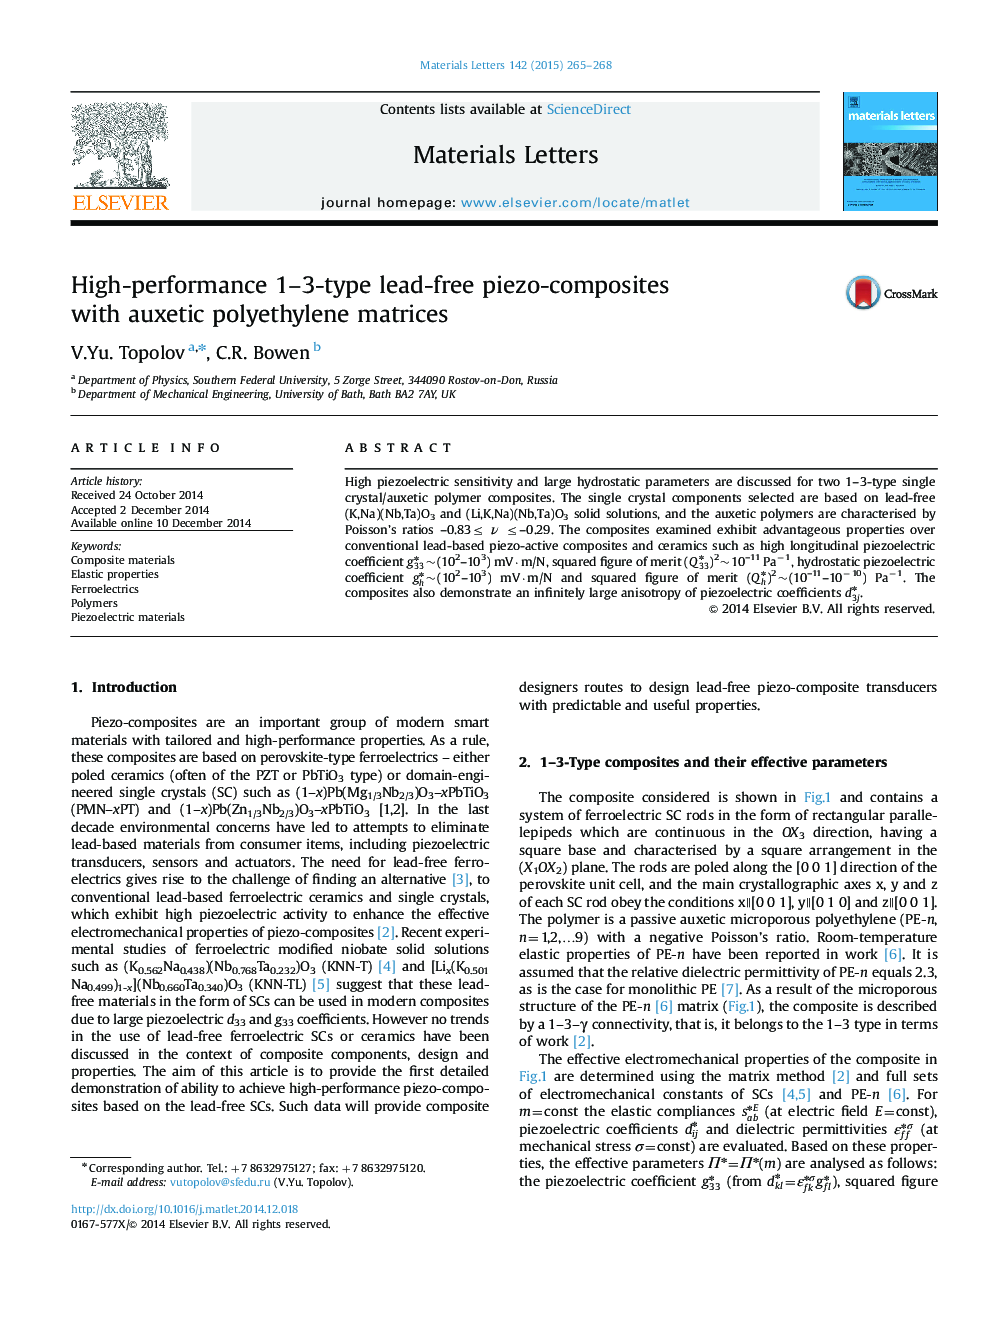 High-performance 1–3-type lead-free piezo-composites with auxetic polyethylene matrices